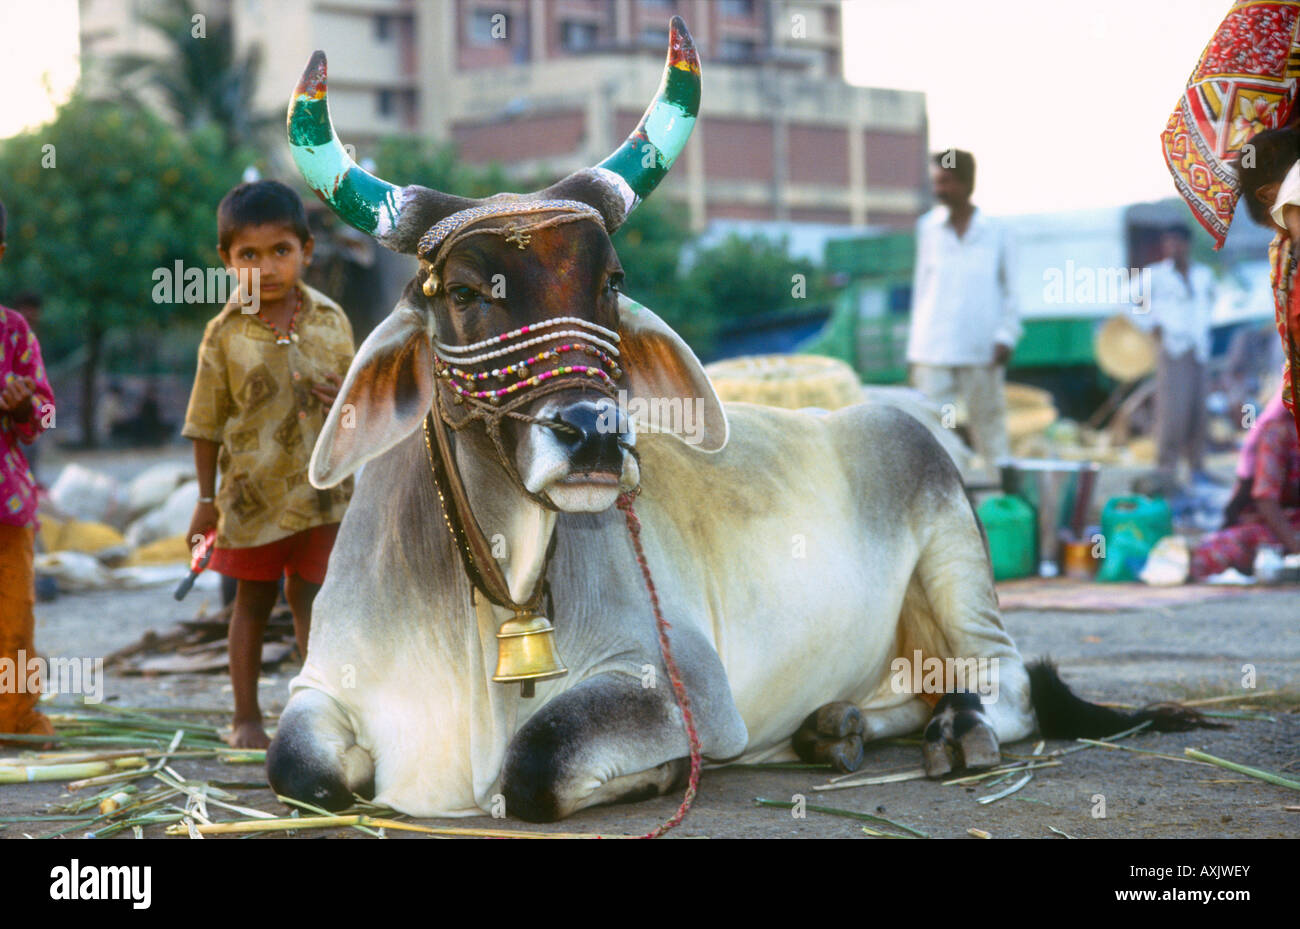 Brahmin bull with colourful painted horns & decorations near the beaches of Mumbai with small Indian boy next to it Bombay,India Stock Photo